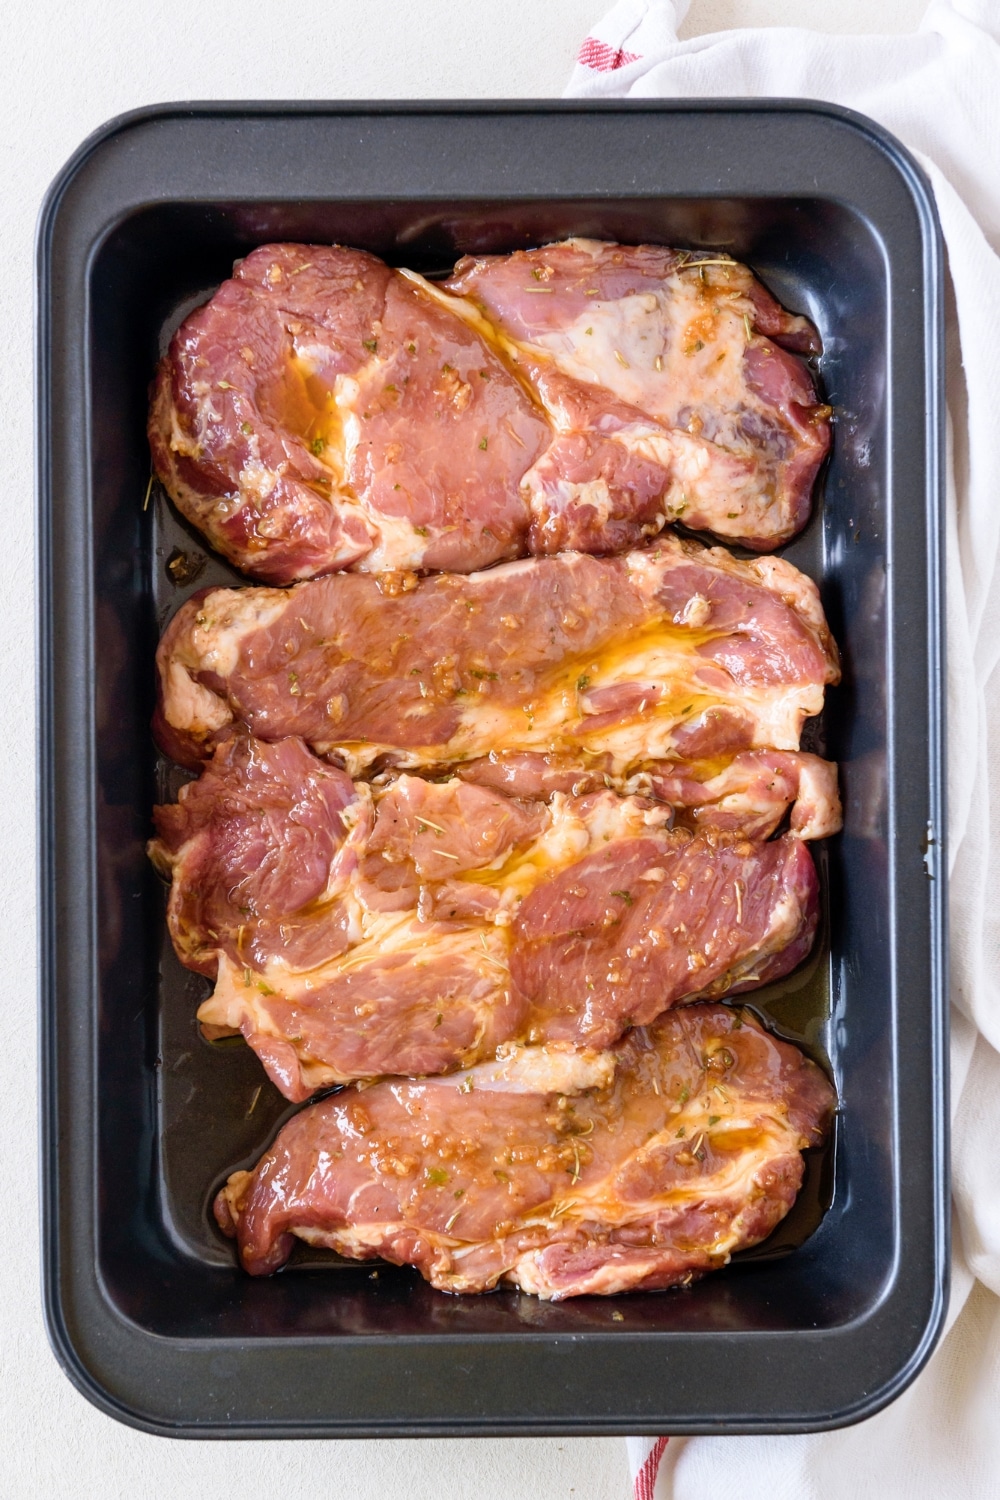 A baking dish filled with marinating pork chops.